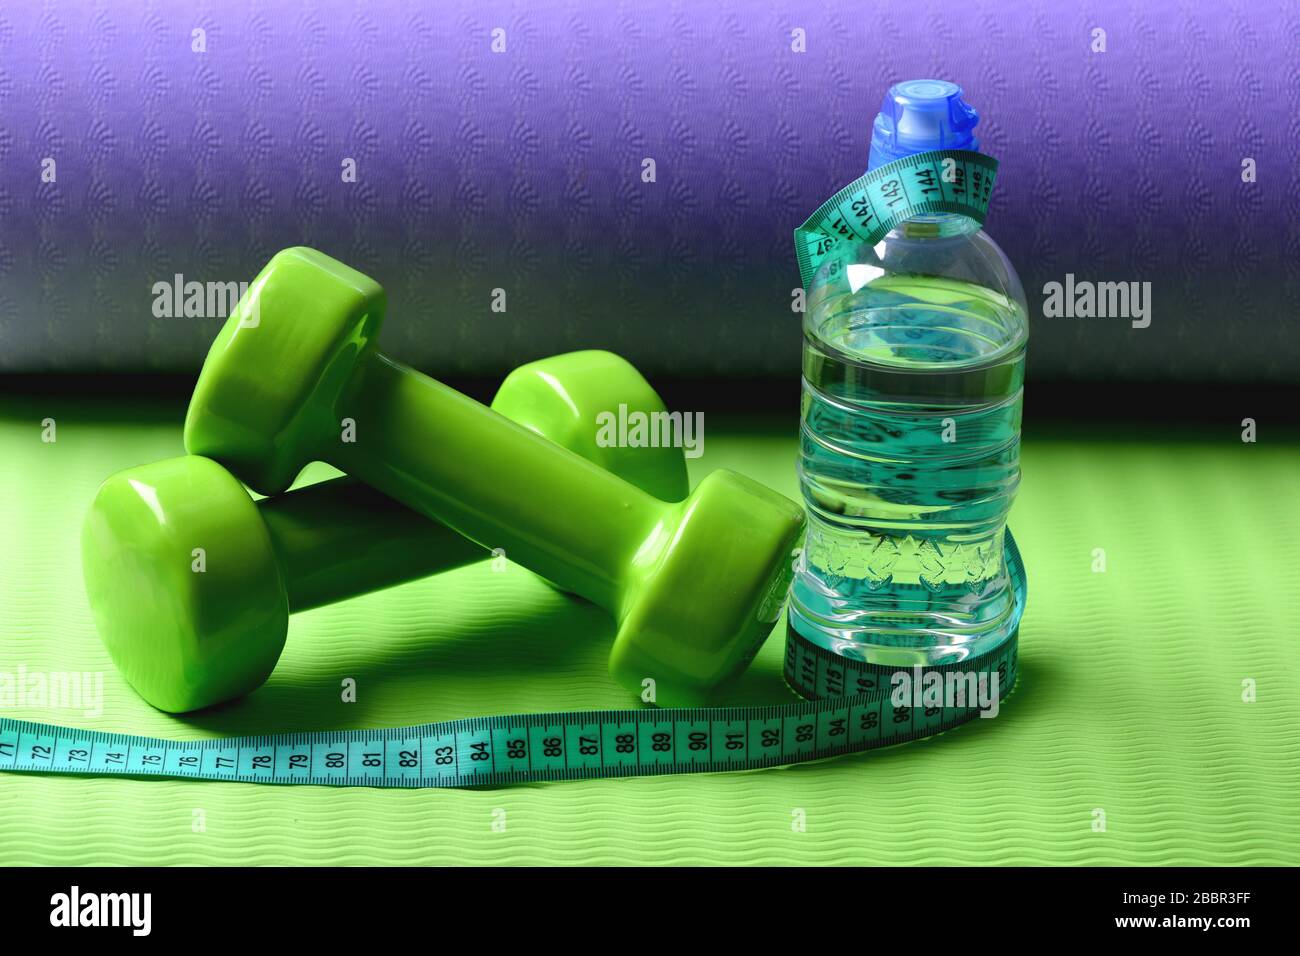 https://c8.alamy.com/comp/2BBR3FF/shaping-and-fitness-equipment-barbells-near-cyan-measuring-tape-roll-and-water-bottle-sports-and-healthy-lifestyle-concept-dumbbells-made-of-green-plastic-on-green-and-purple-texture-background-2BBR3FF.jpg